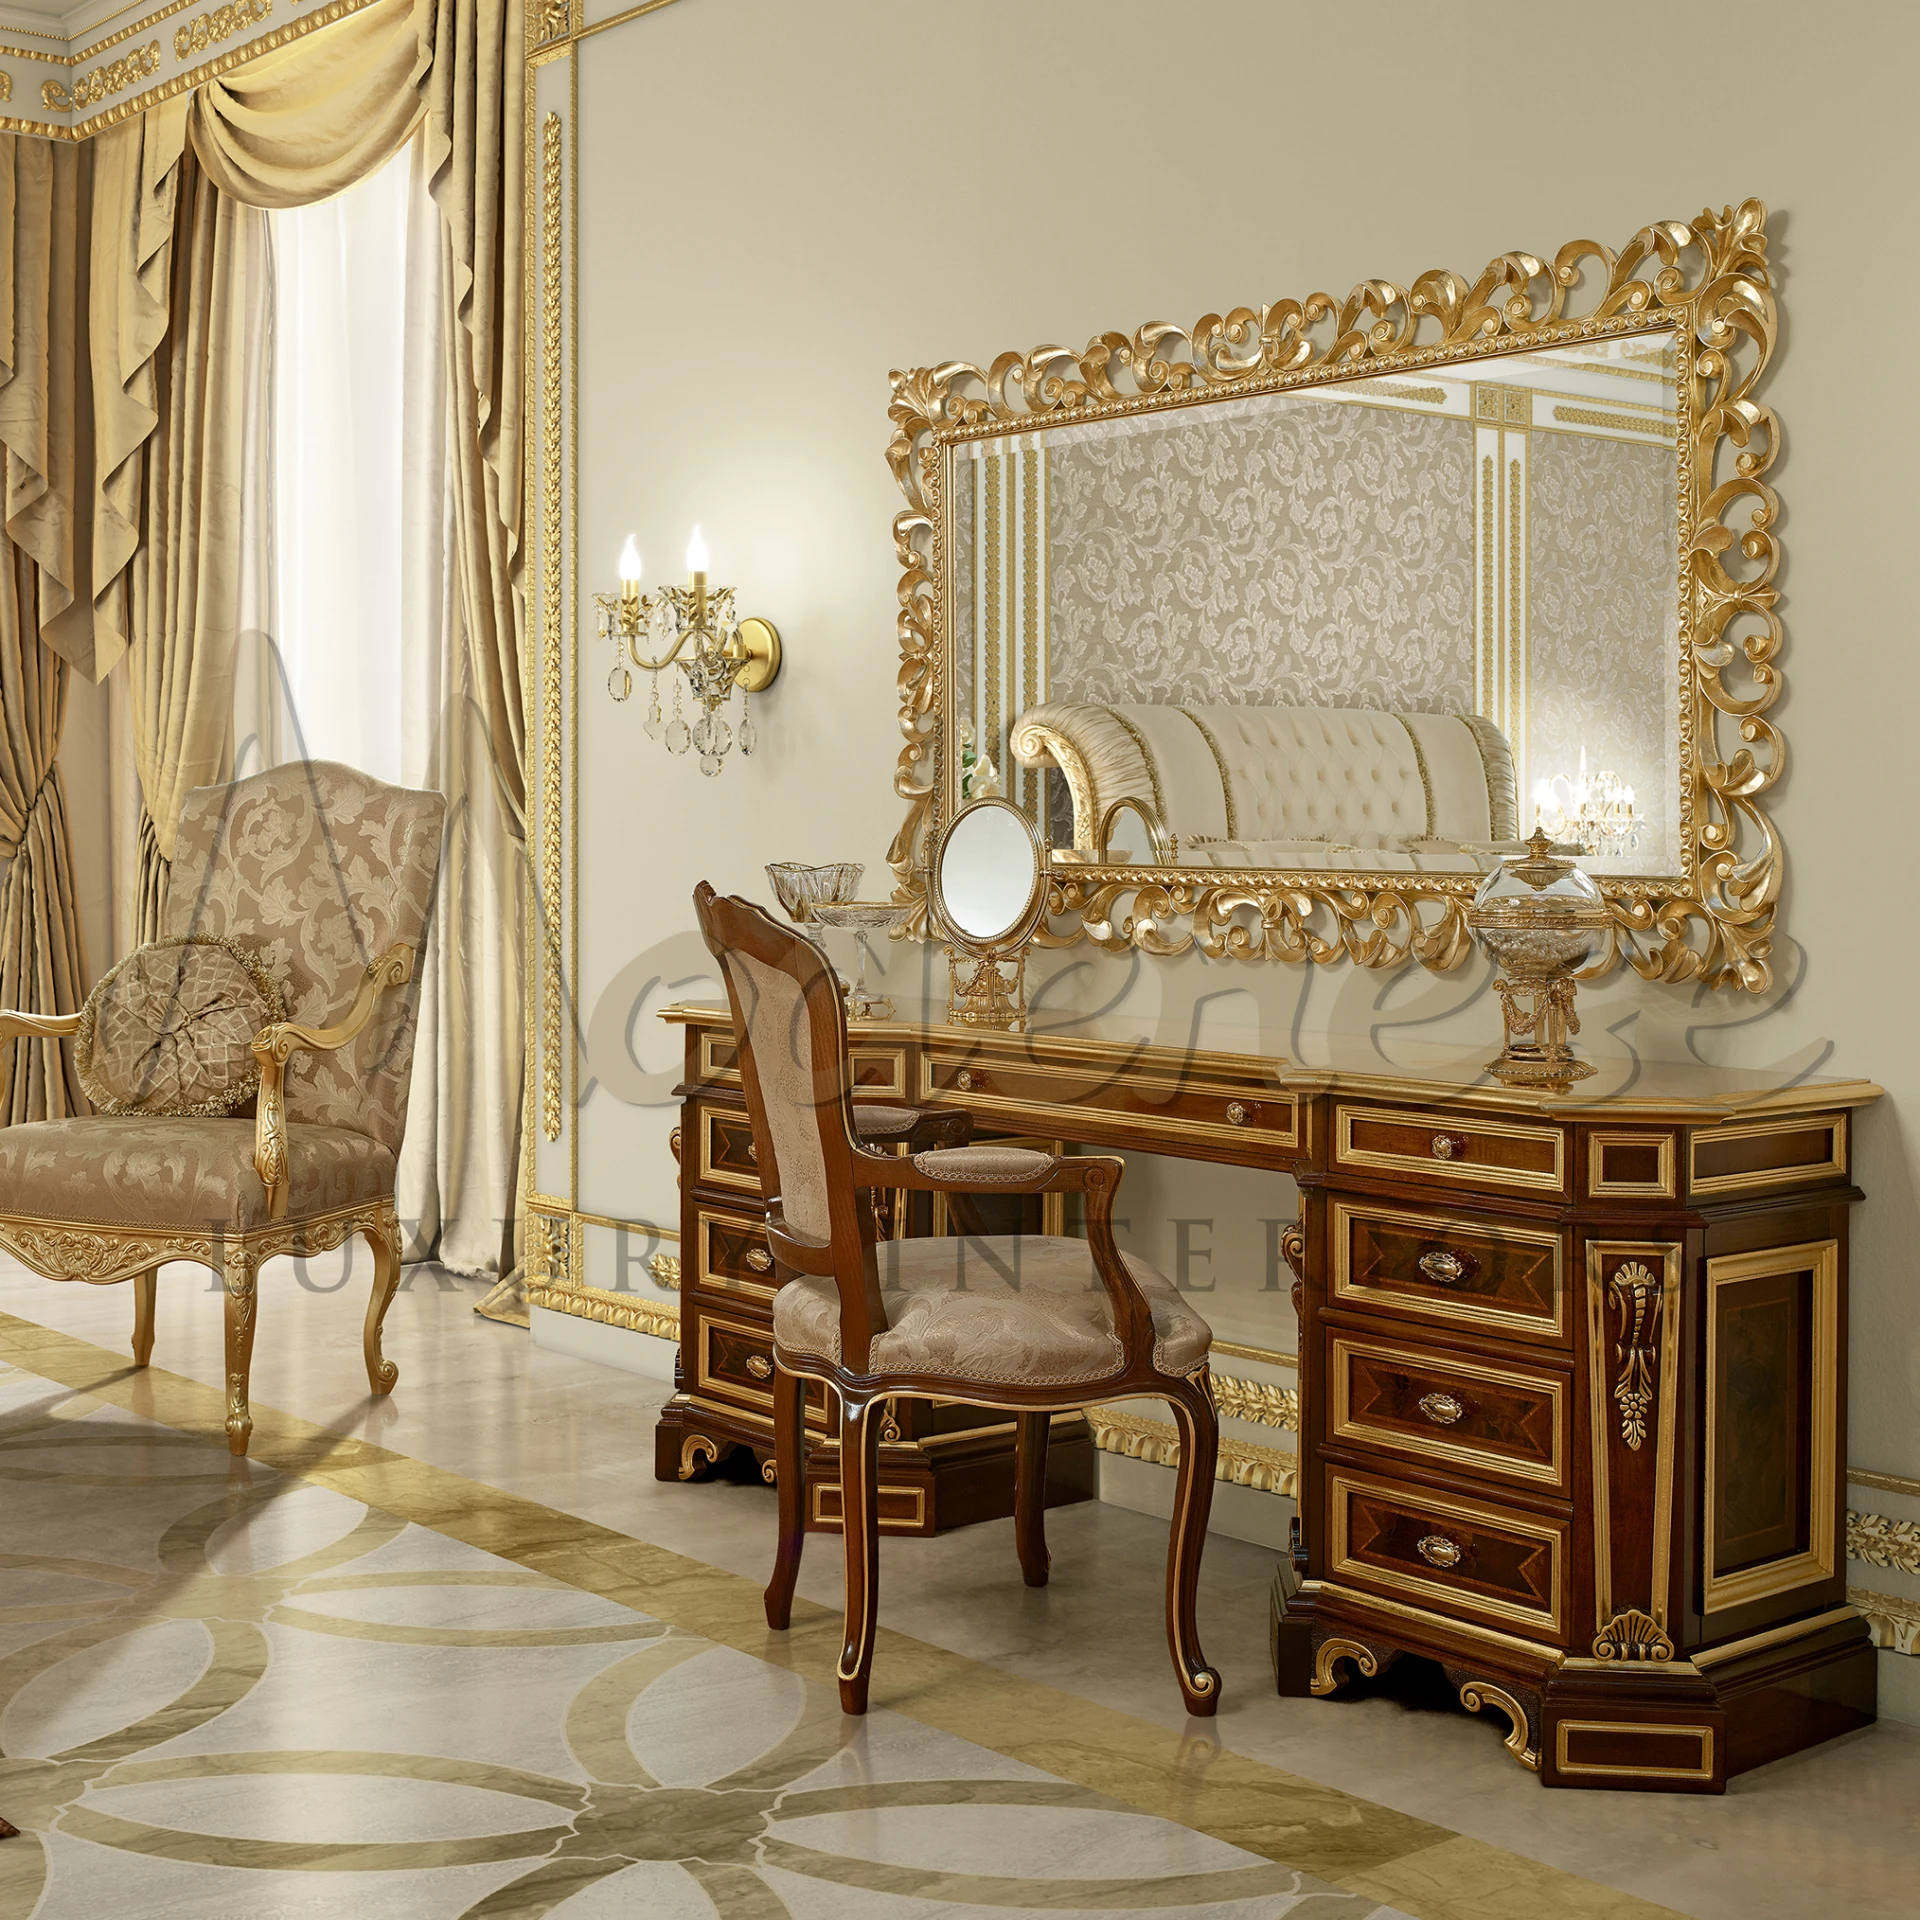 Charming Gold Mirror, intricately carved by artisans, embodies luxury and elegance for refined home interiors.